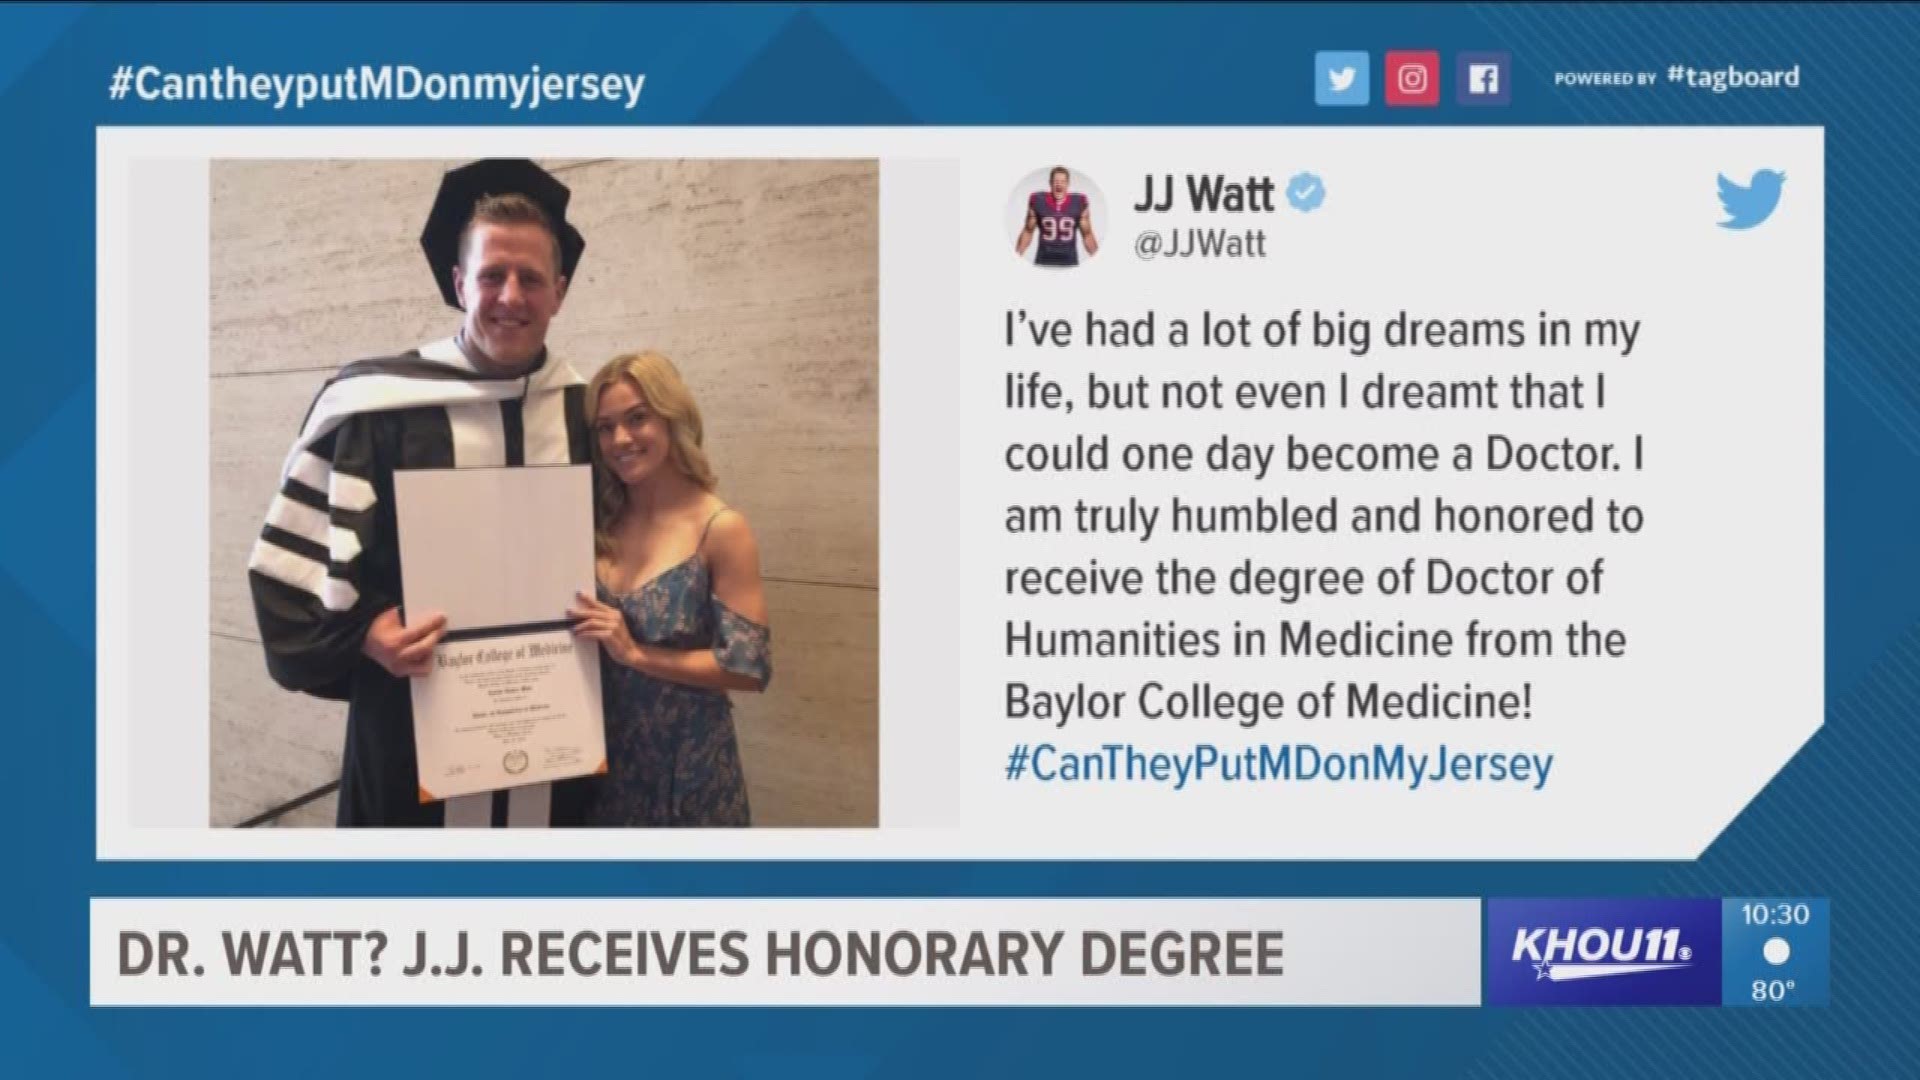 J.J> Watt received an honorary doctorate degree and addressed the School of Medicine graduates during Tuesday's Baylor College of Medicine commencement ceremony.